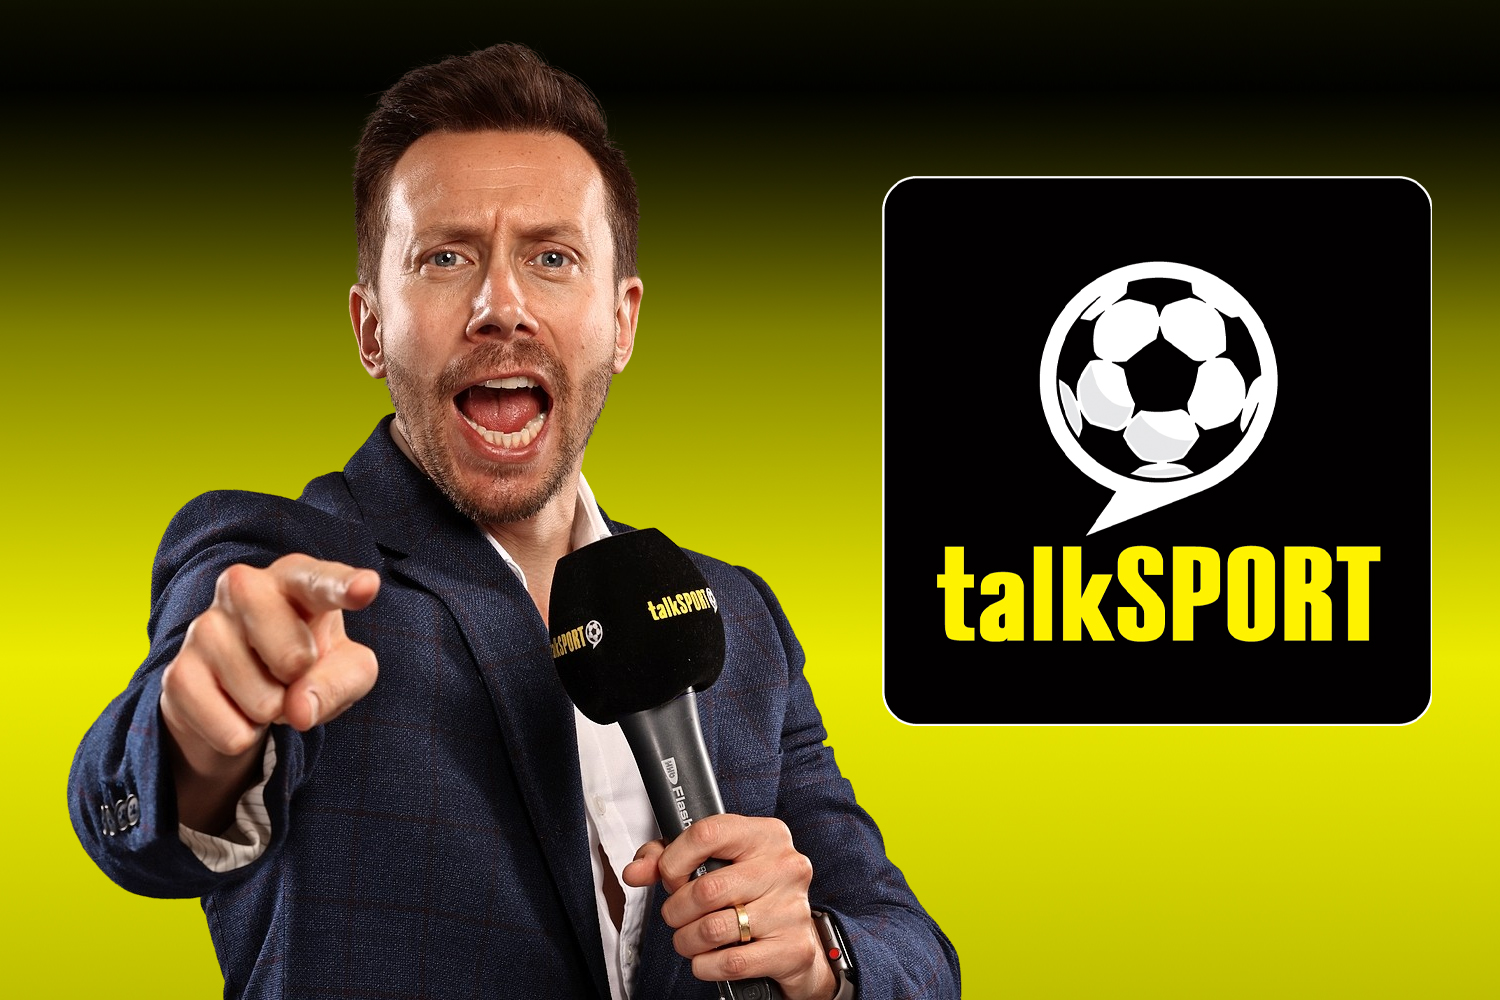 talkSPORT launches new 'Game of the Day' show to keep fans covered amid Match of the Day chaos at BBC